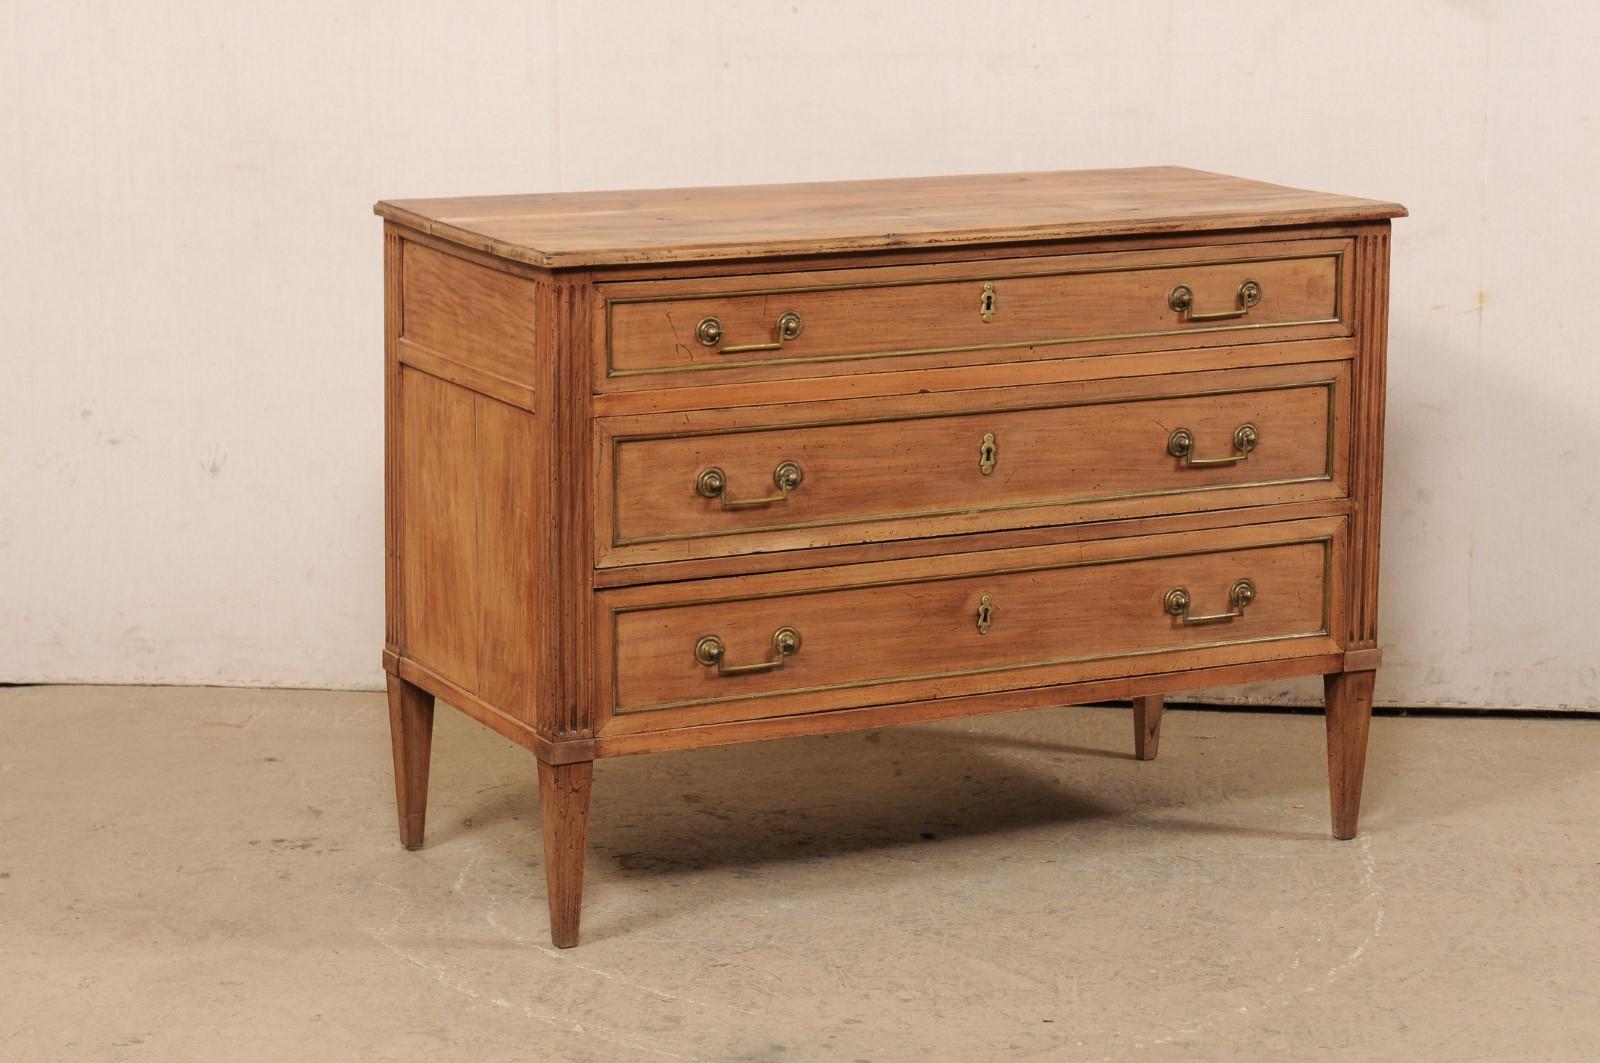 A French Neoclassical style three-drawer commode from the 19th century. This antique chest from France features a rectangular-shaped top which slightly overhangs the case below which houses three graduated drawers flanked within fluted side-posts,